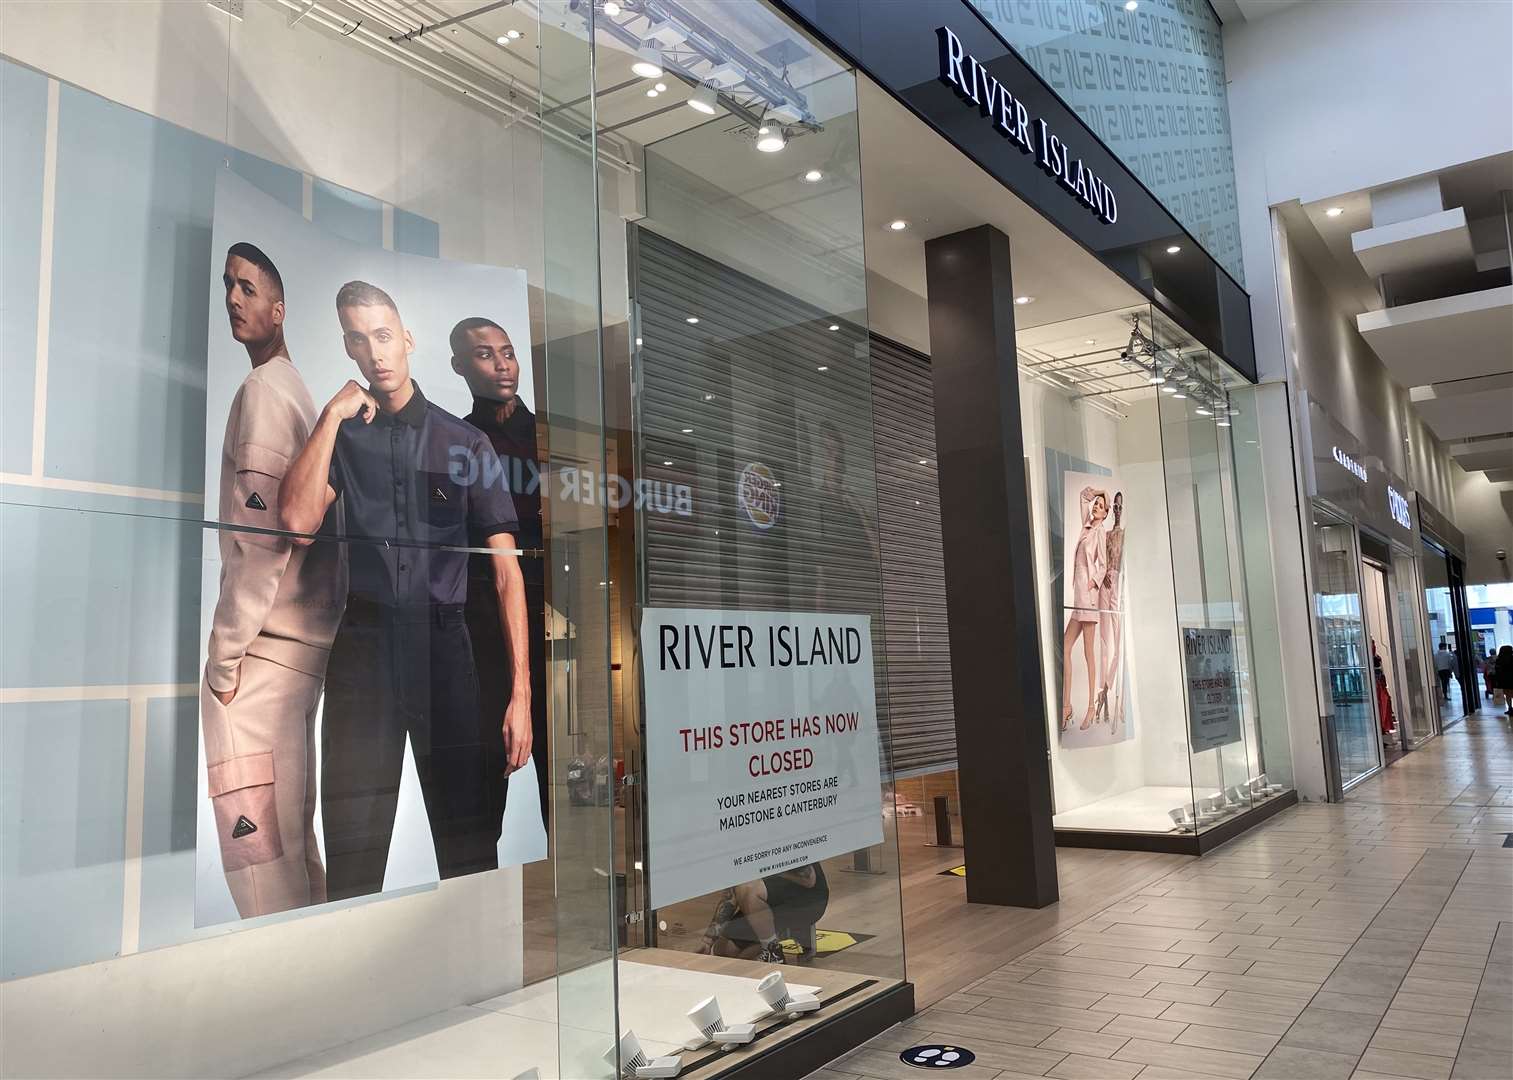 River Island closed its Ashford store last August, and the unit has remained empty since. Picture: Steve Salter